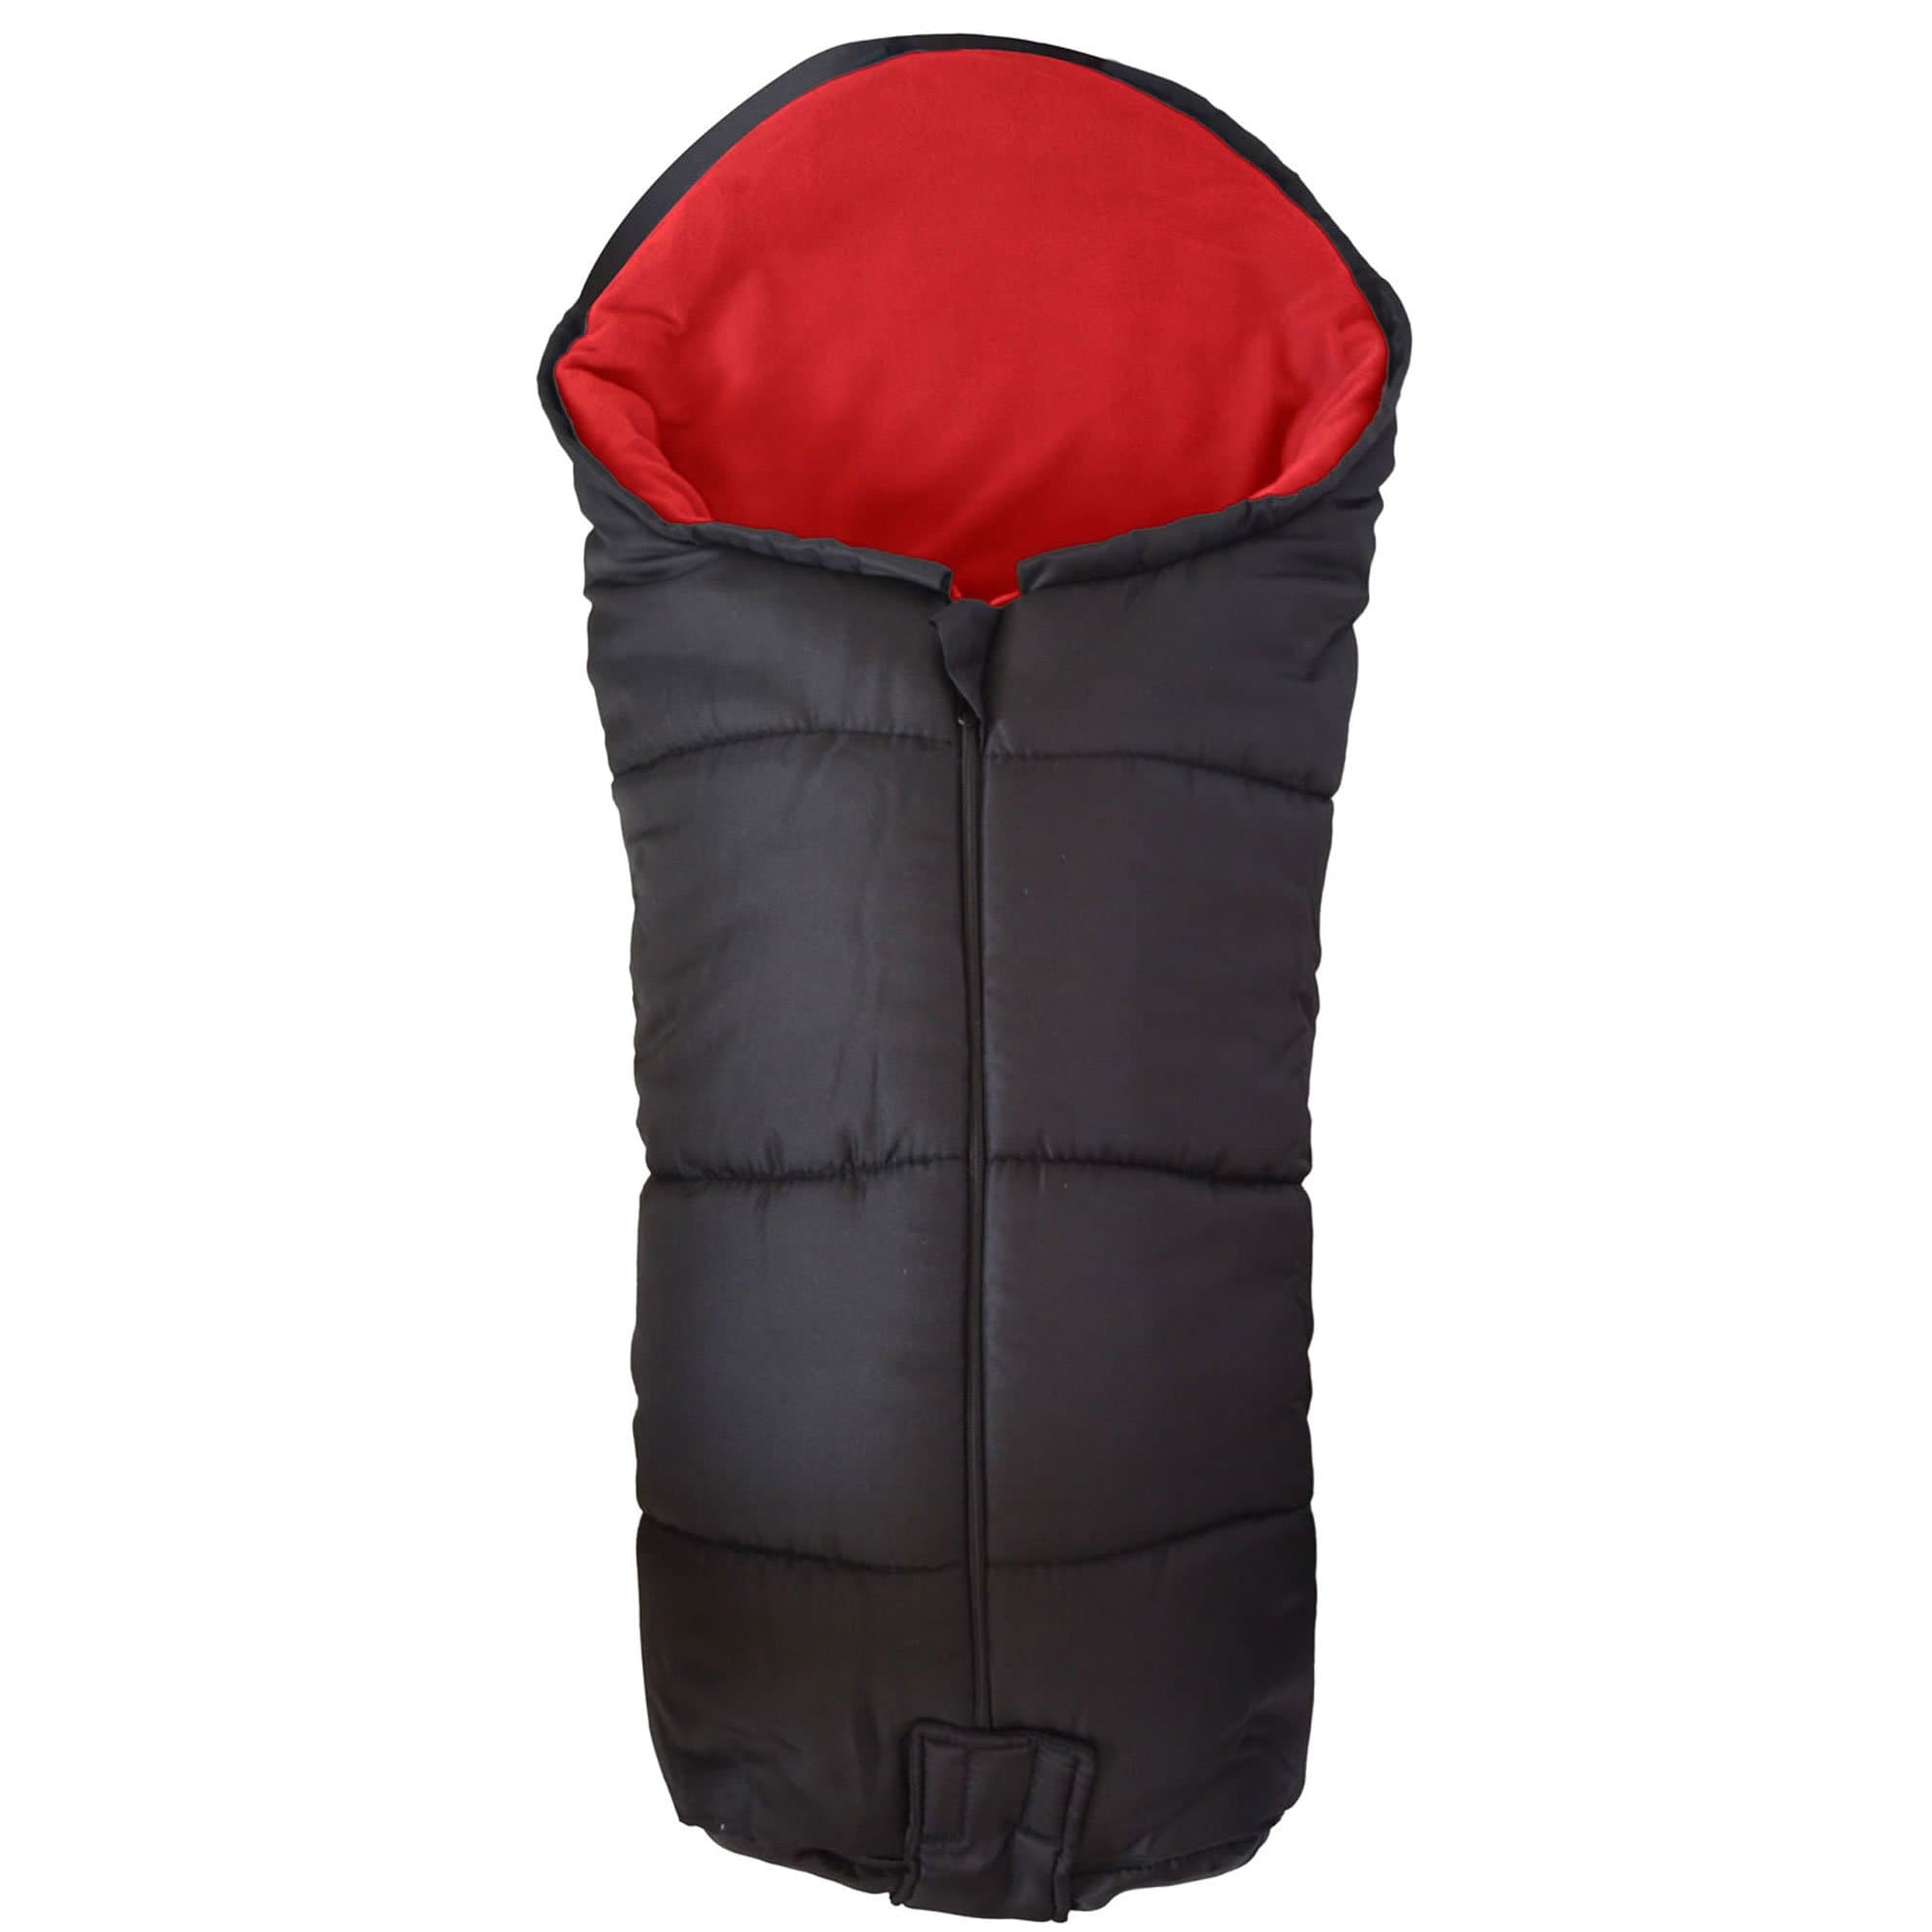 Deluxe Footmuff / Cosy Toes Compatible with Kinderkraft - Red / Fits All Models | For Your Little One